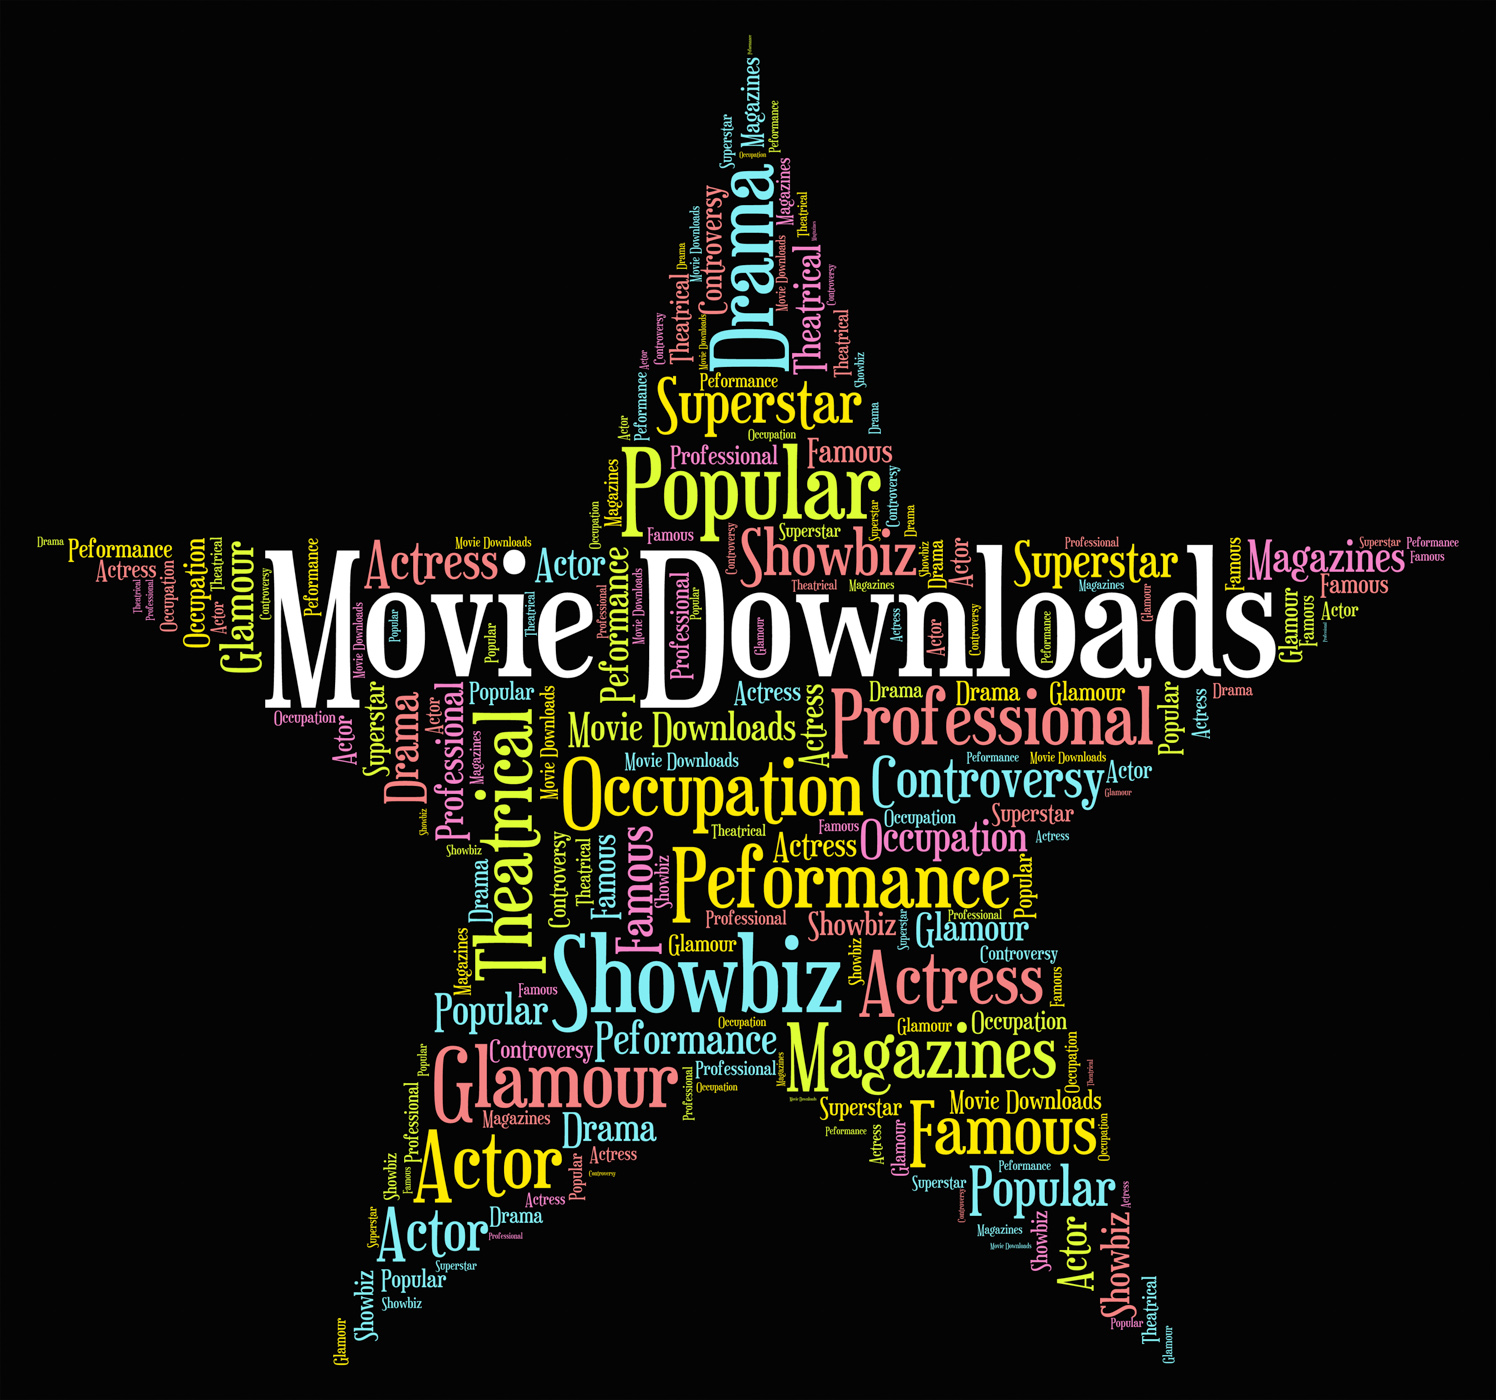 Movie downloads represents picture show and cinema photo